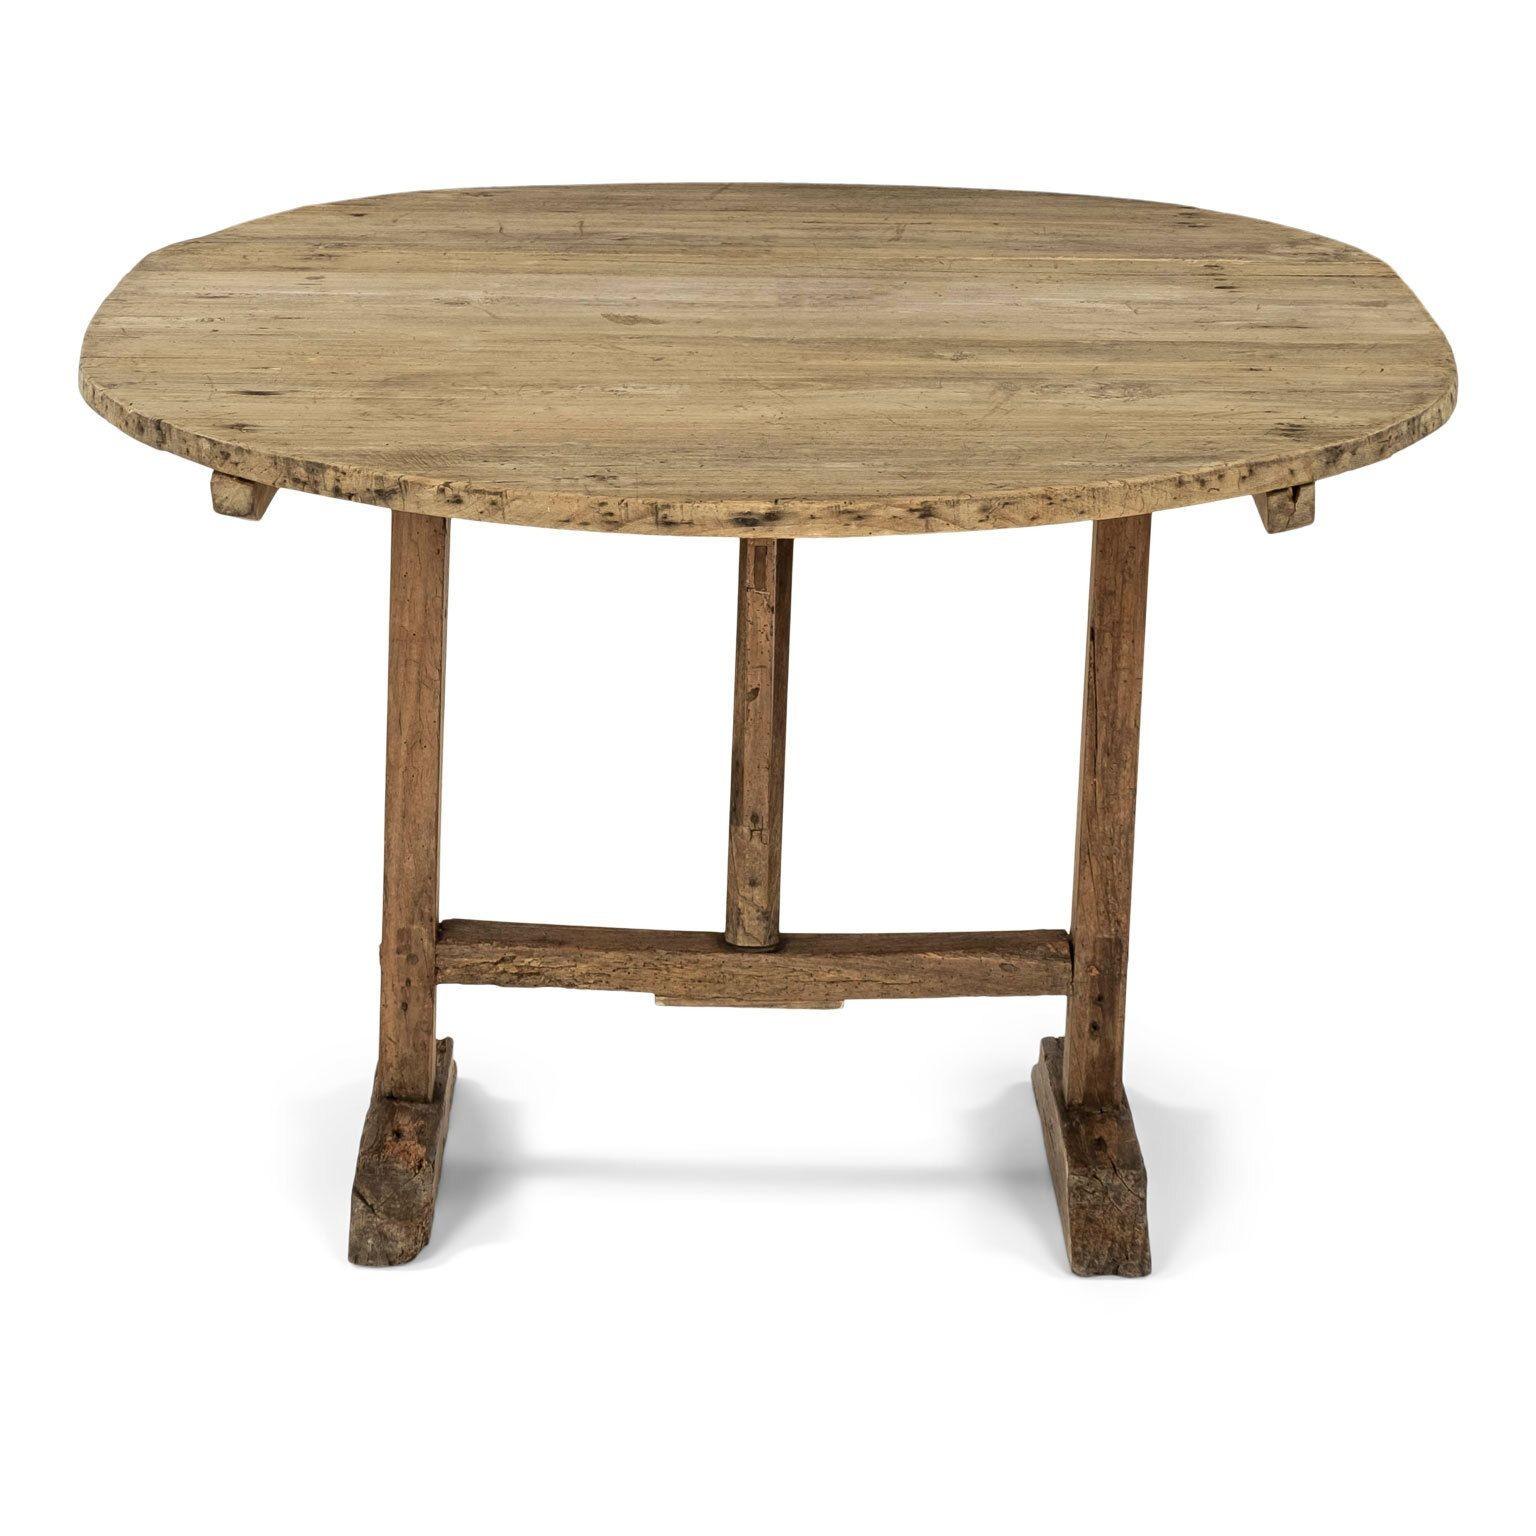 Rustic Sun-Bleached Early Oval-Shape Tilt-Top Table For Sale 2